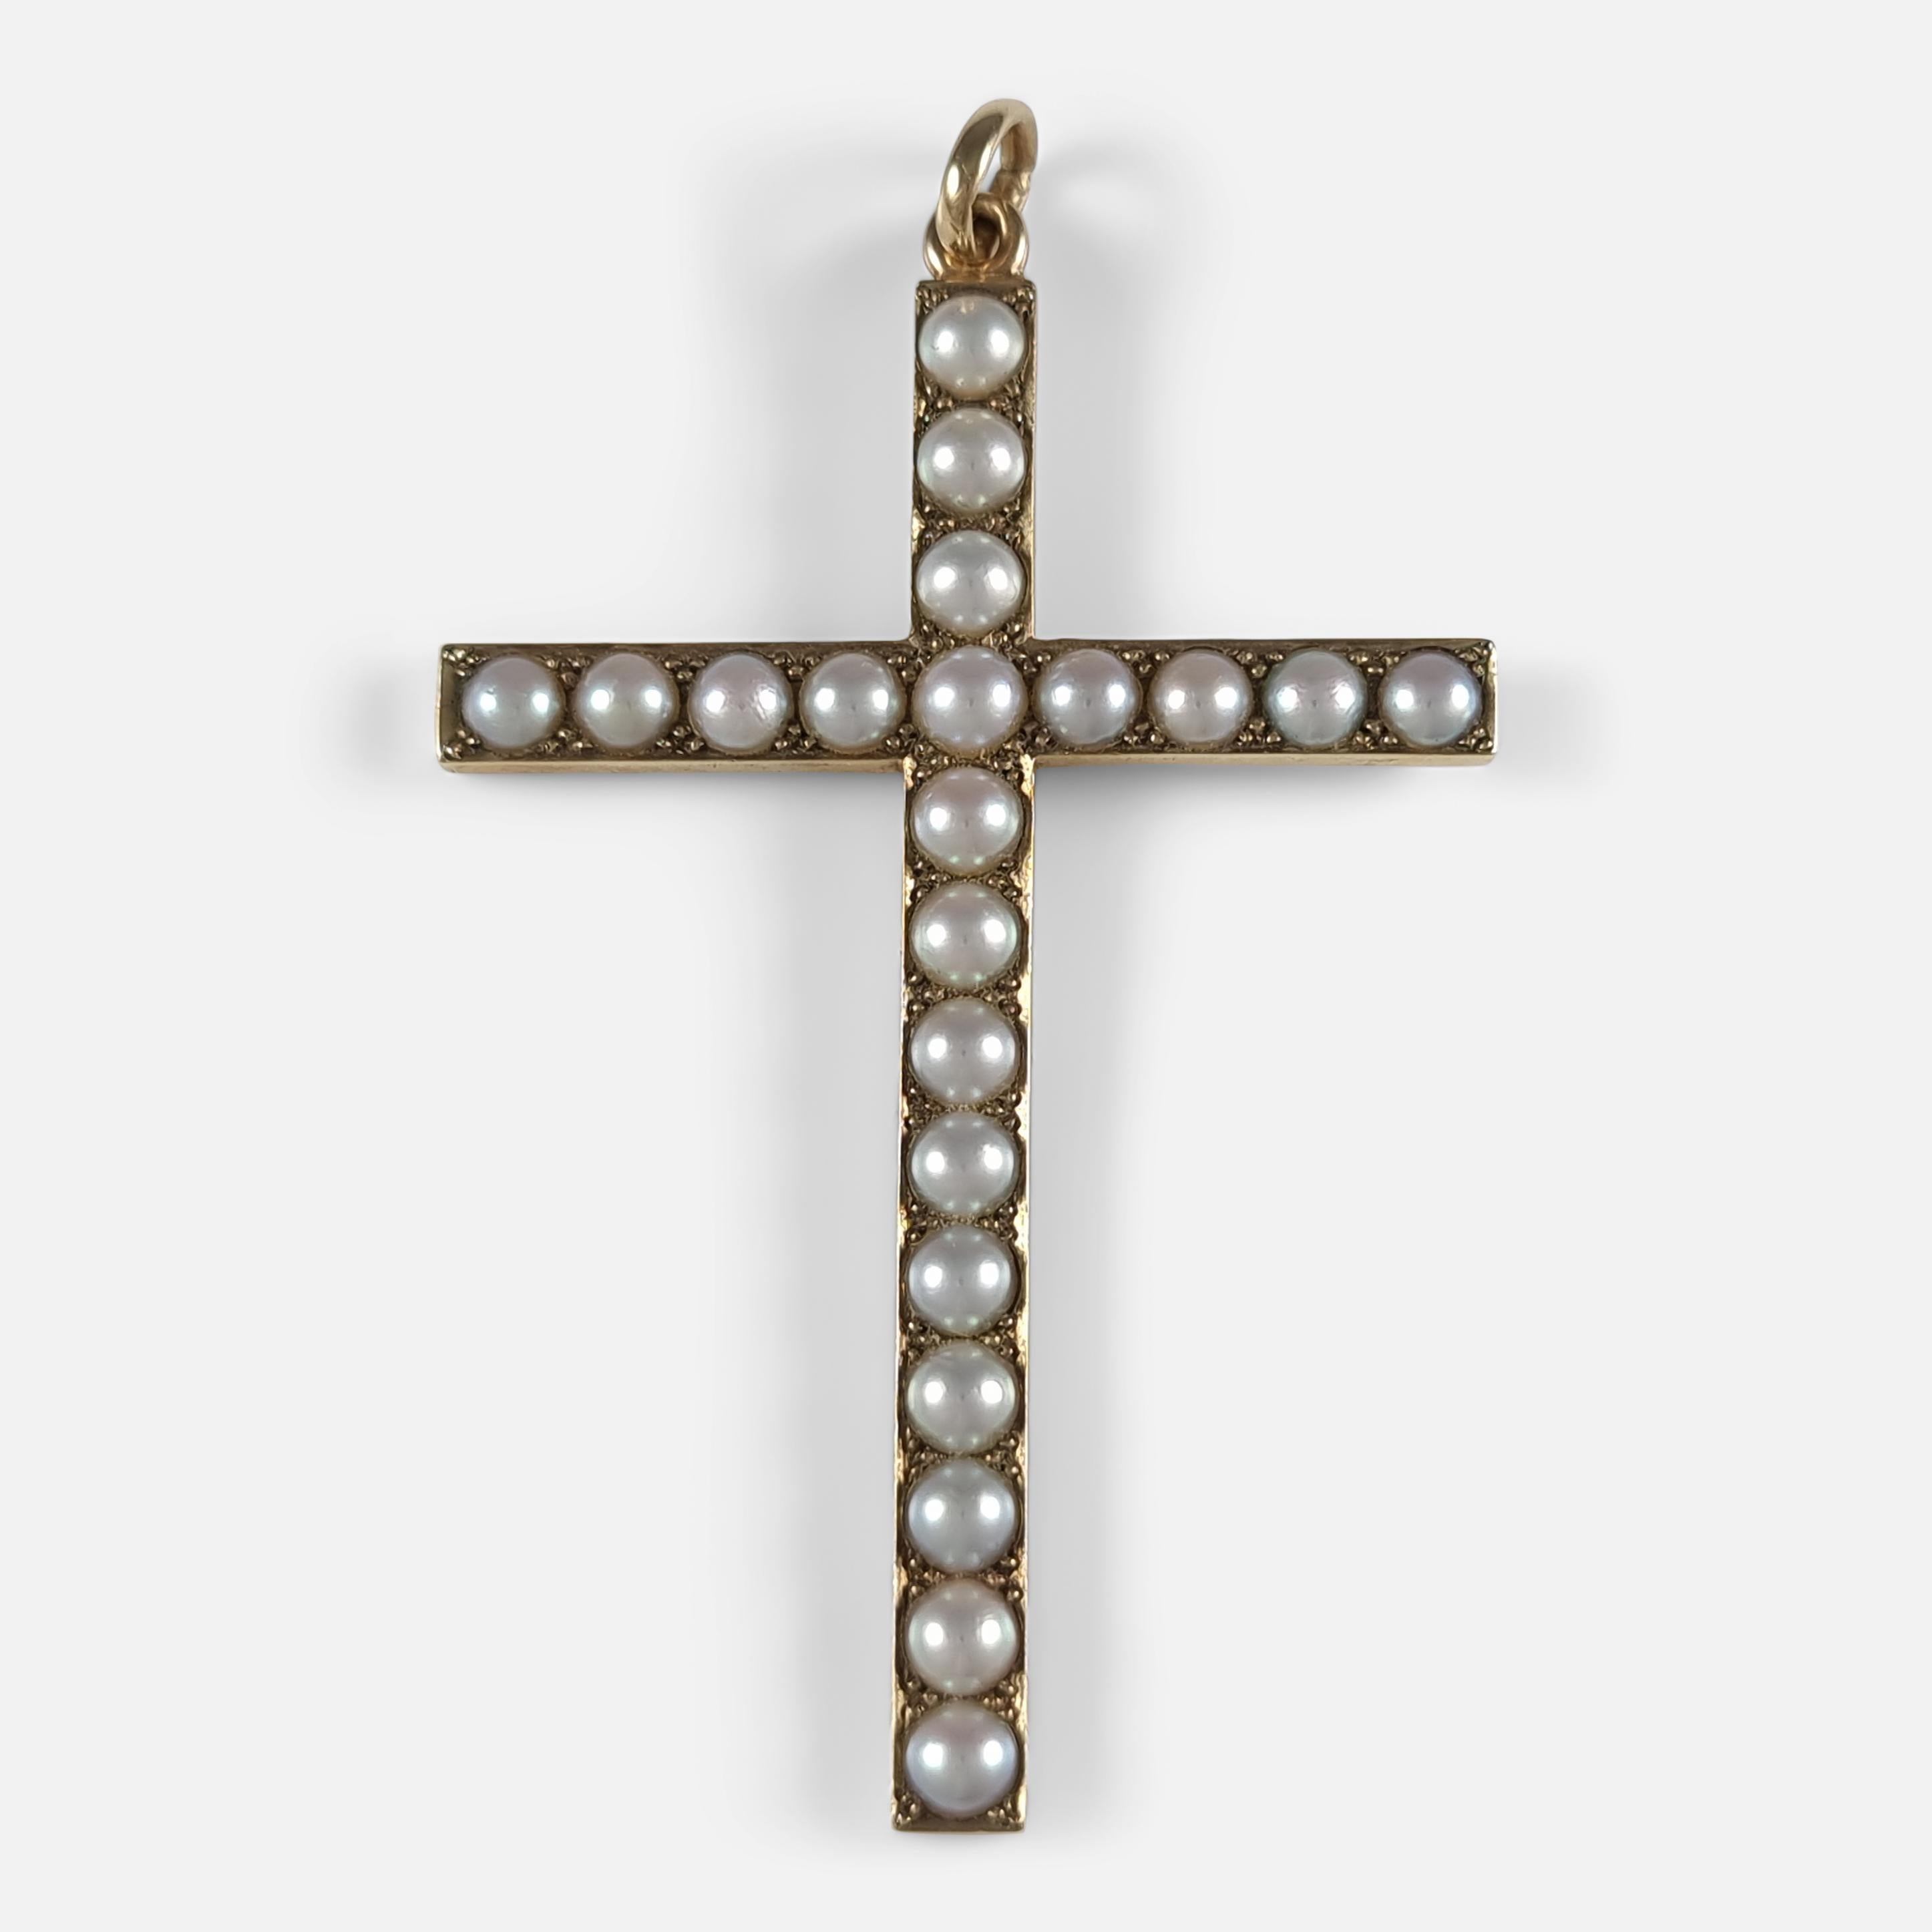 A George VI 9ct gold seed pearl cross pendant. The cross pendant is crafted in gold, and set to the front with 21 seed pearls.

Hallmarked with Birmingham assay marks, date letter 